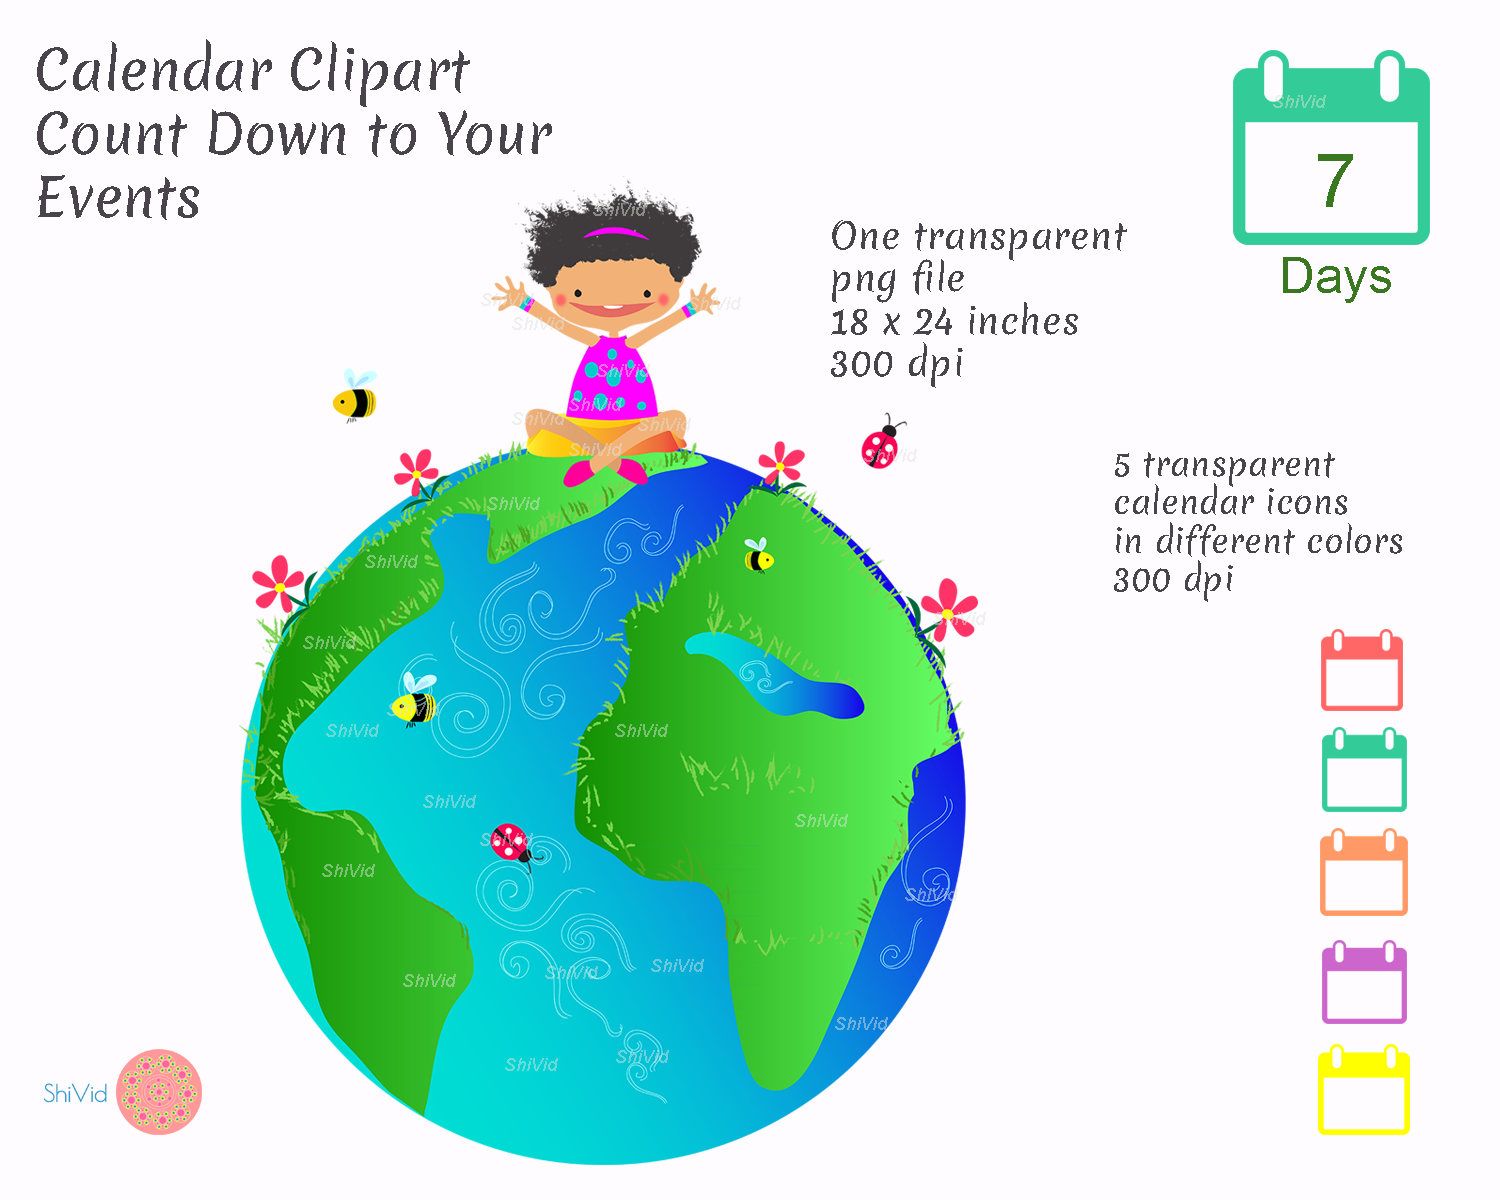 Nursery clipart school event. Calendar countdown for posters